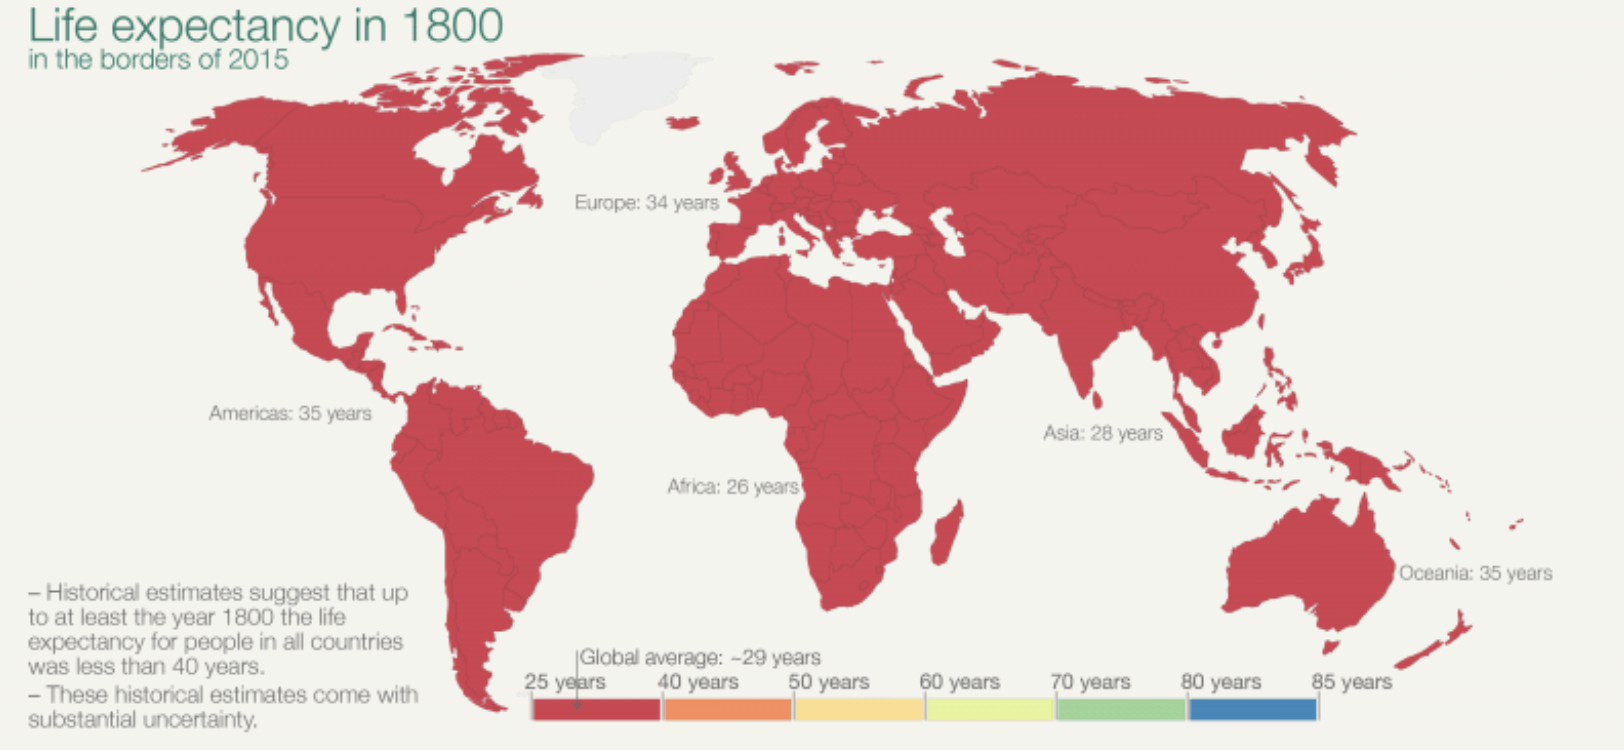 Life expectancy global map (1800)